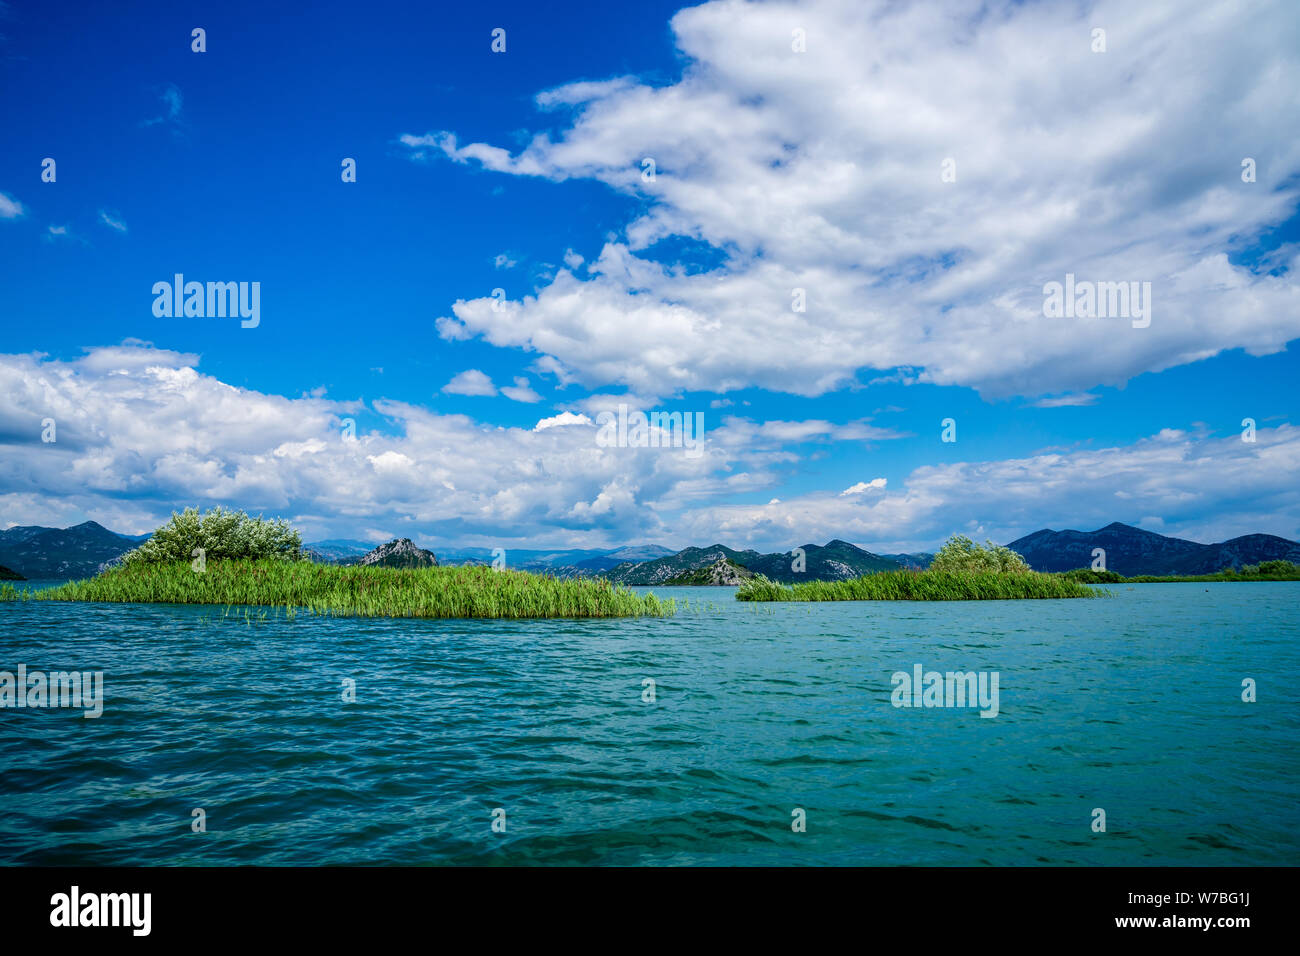 Montenegro, Green islands of reed plants on water surface of skadar lake in national park nature landscape seen from a boat near virpazar Stock Photo